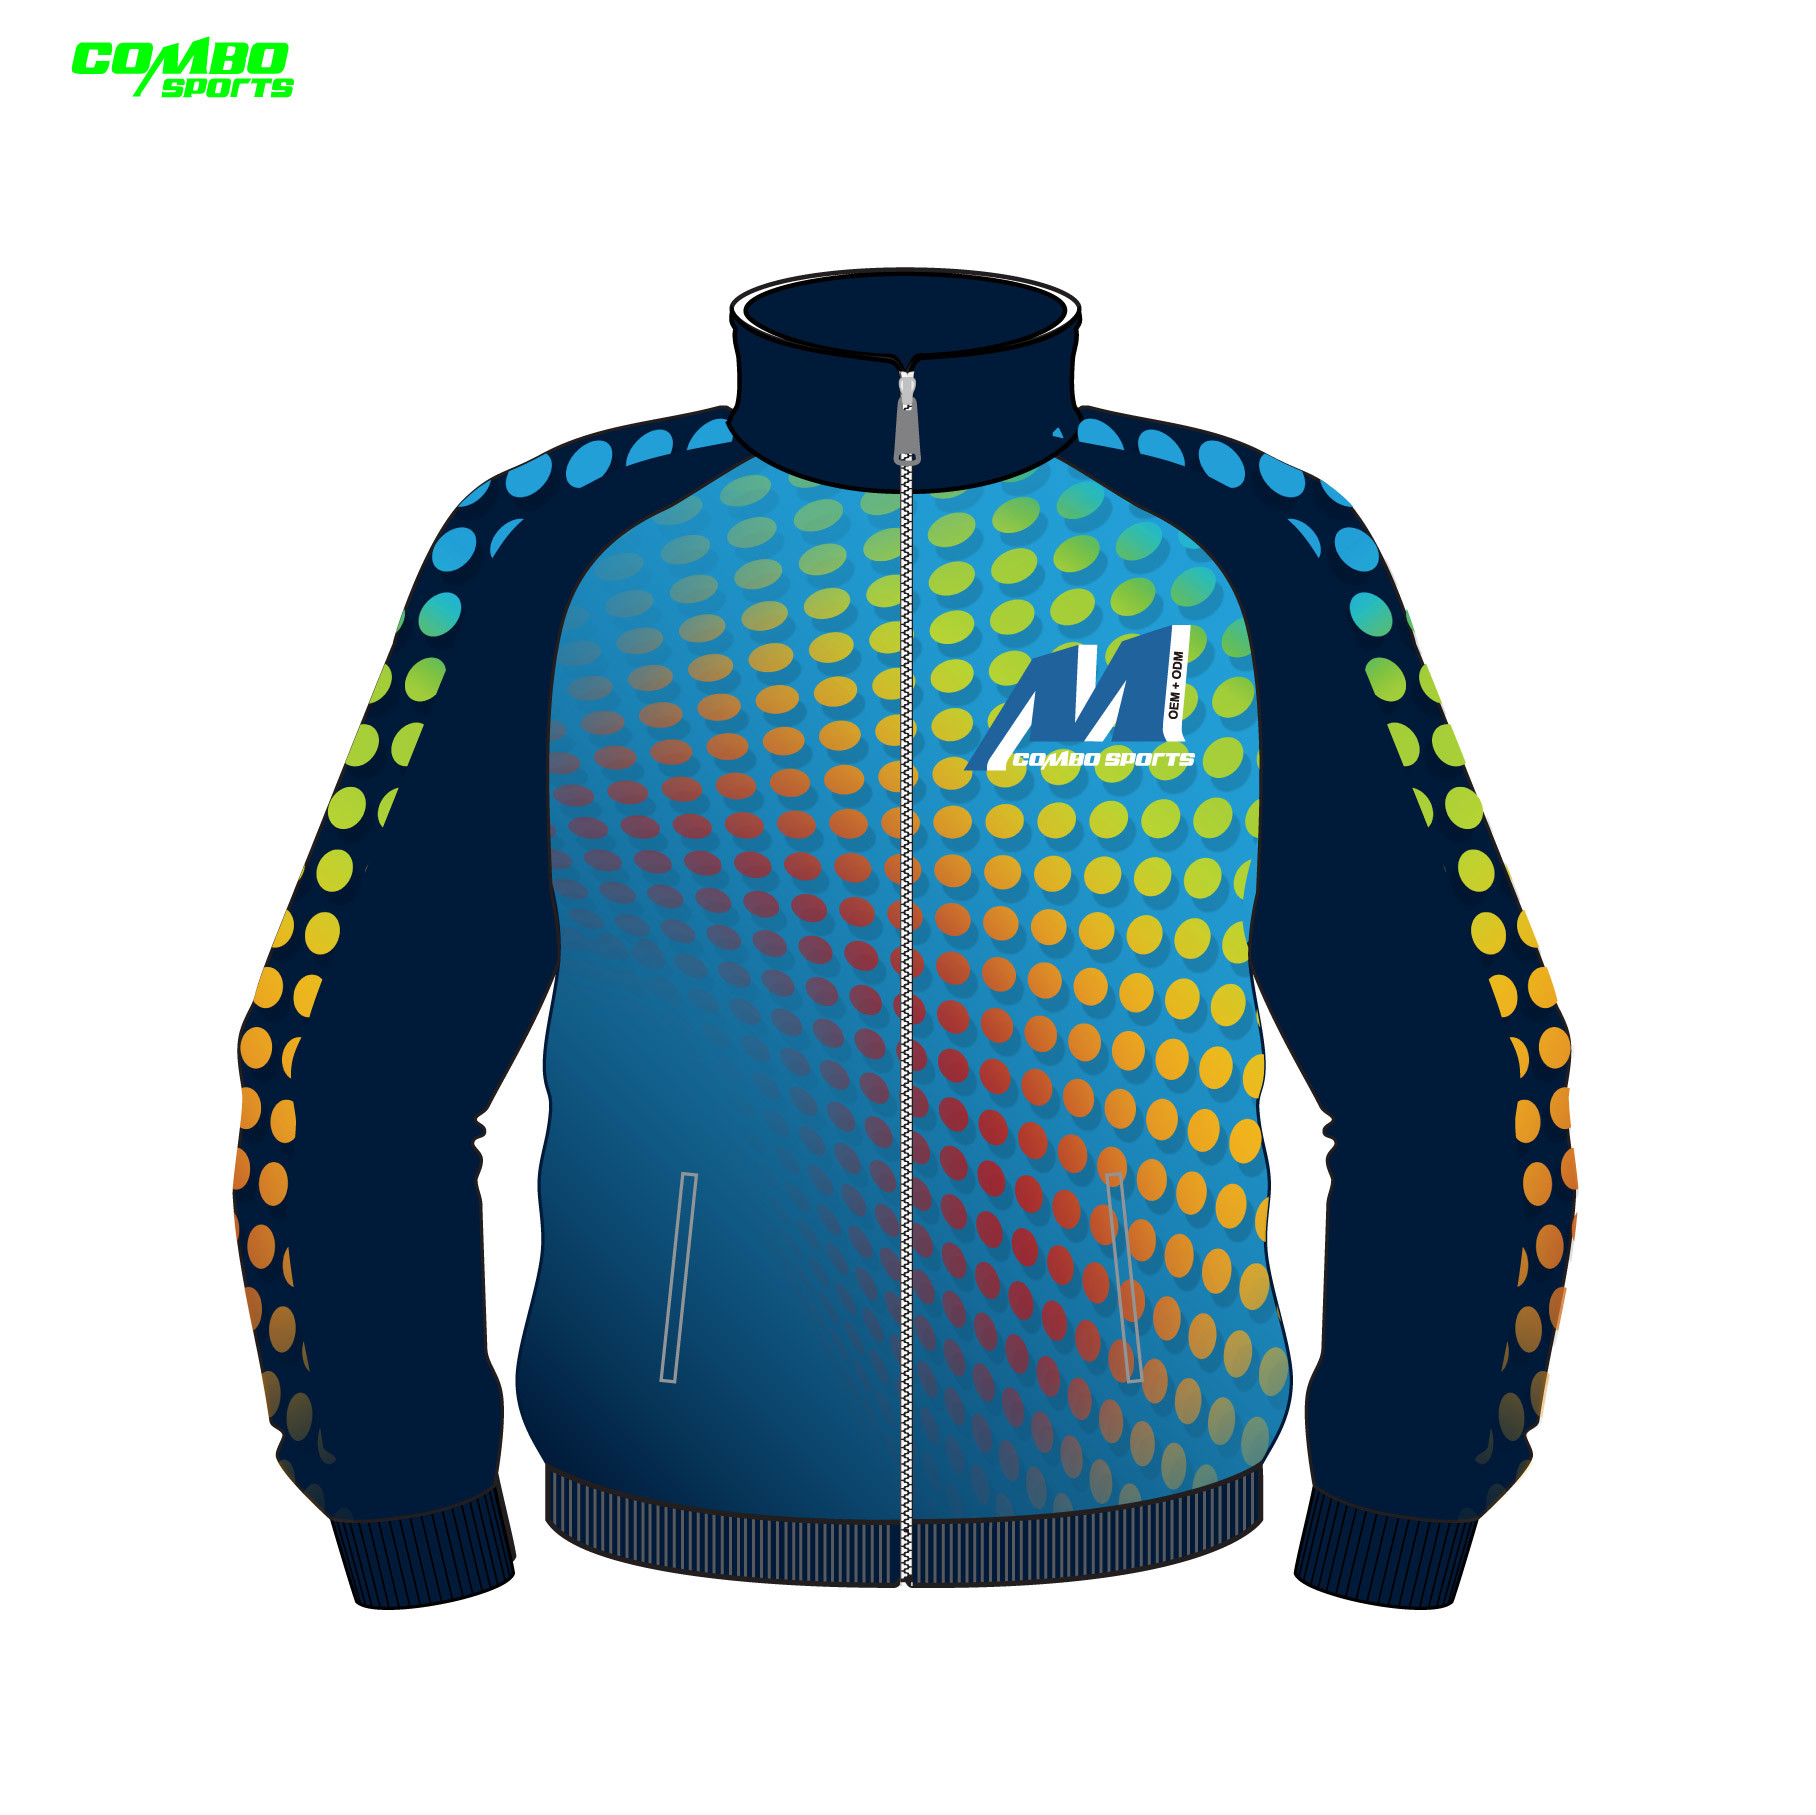  Winter Polyester Waterproof Sports Training Jacket For Men 4-14cm Size Manufactures